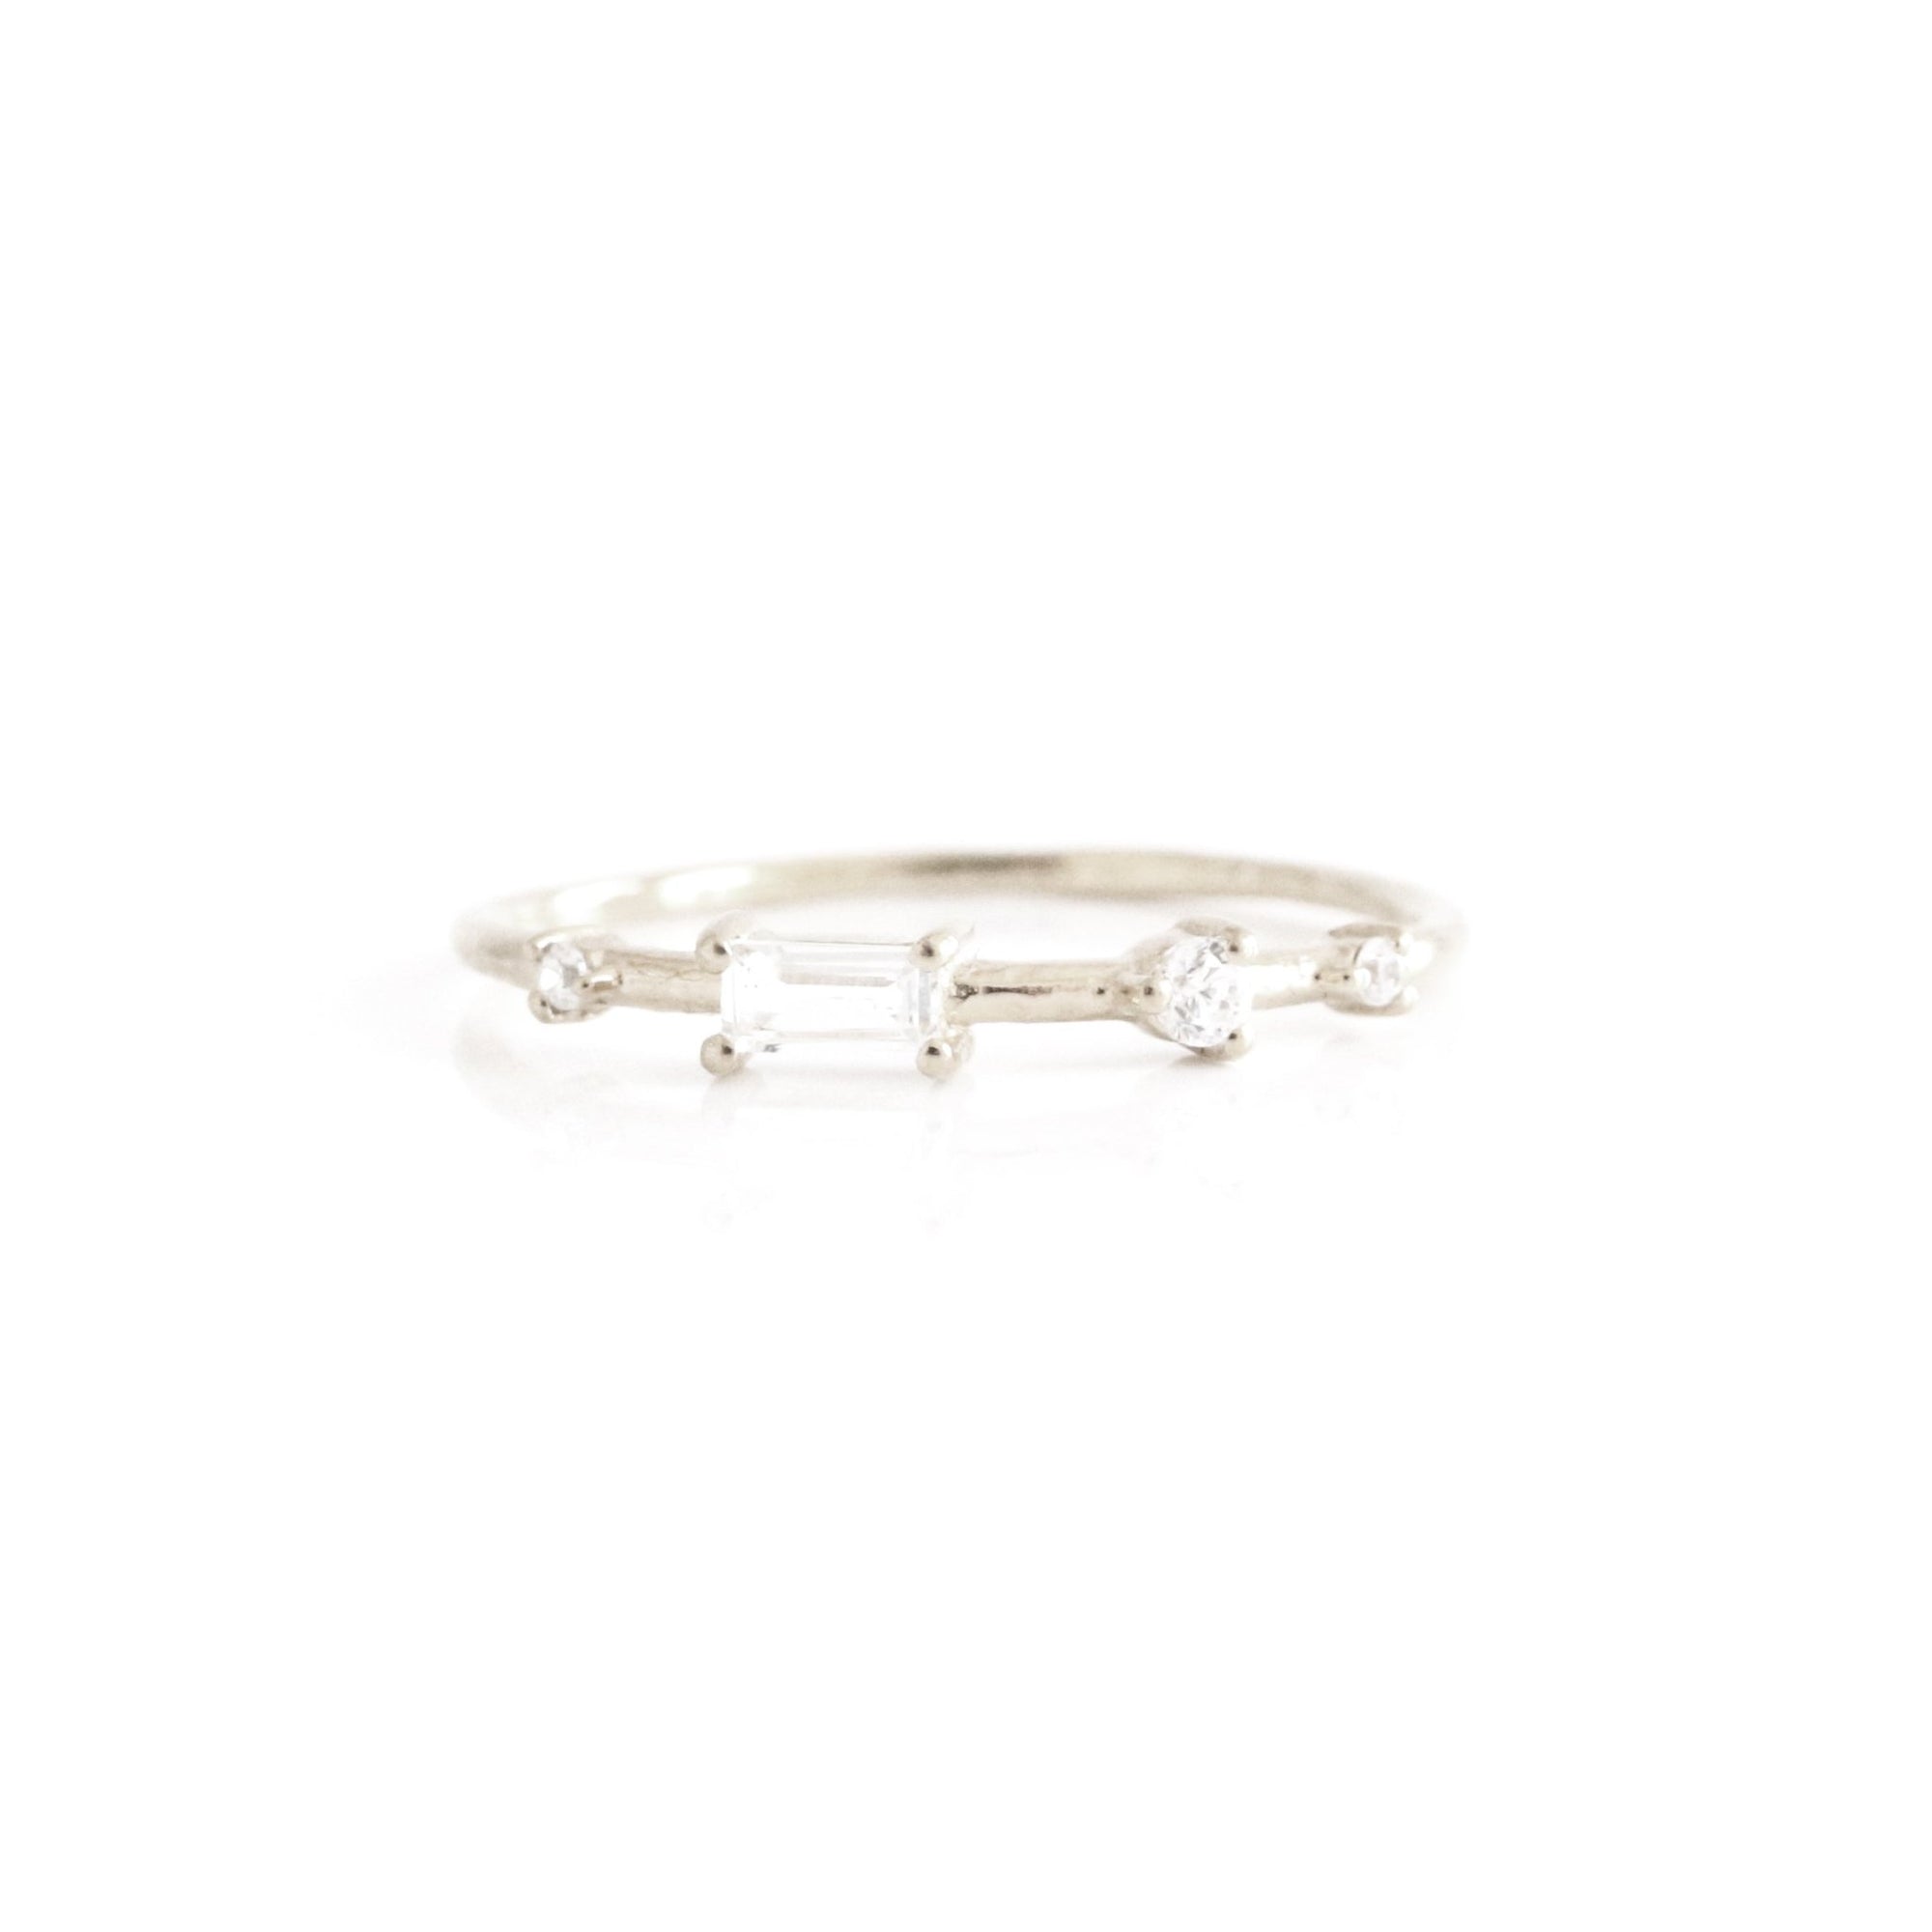 Loyal Dancing Stacking Ring - White Topaz, Cubic Zirconia & Silver - SO PRETTY CARA COTTER